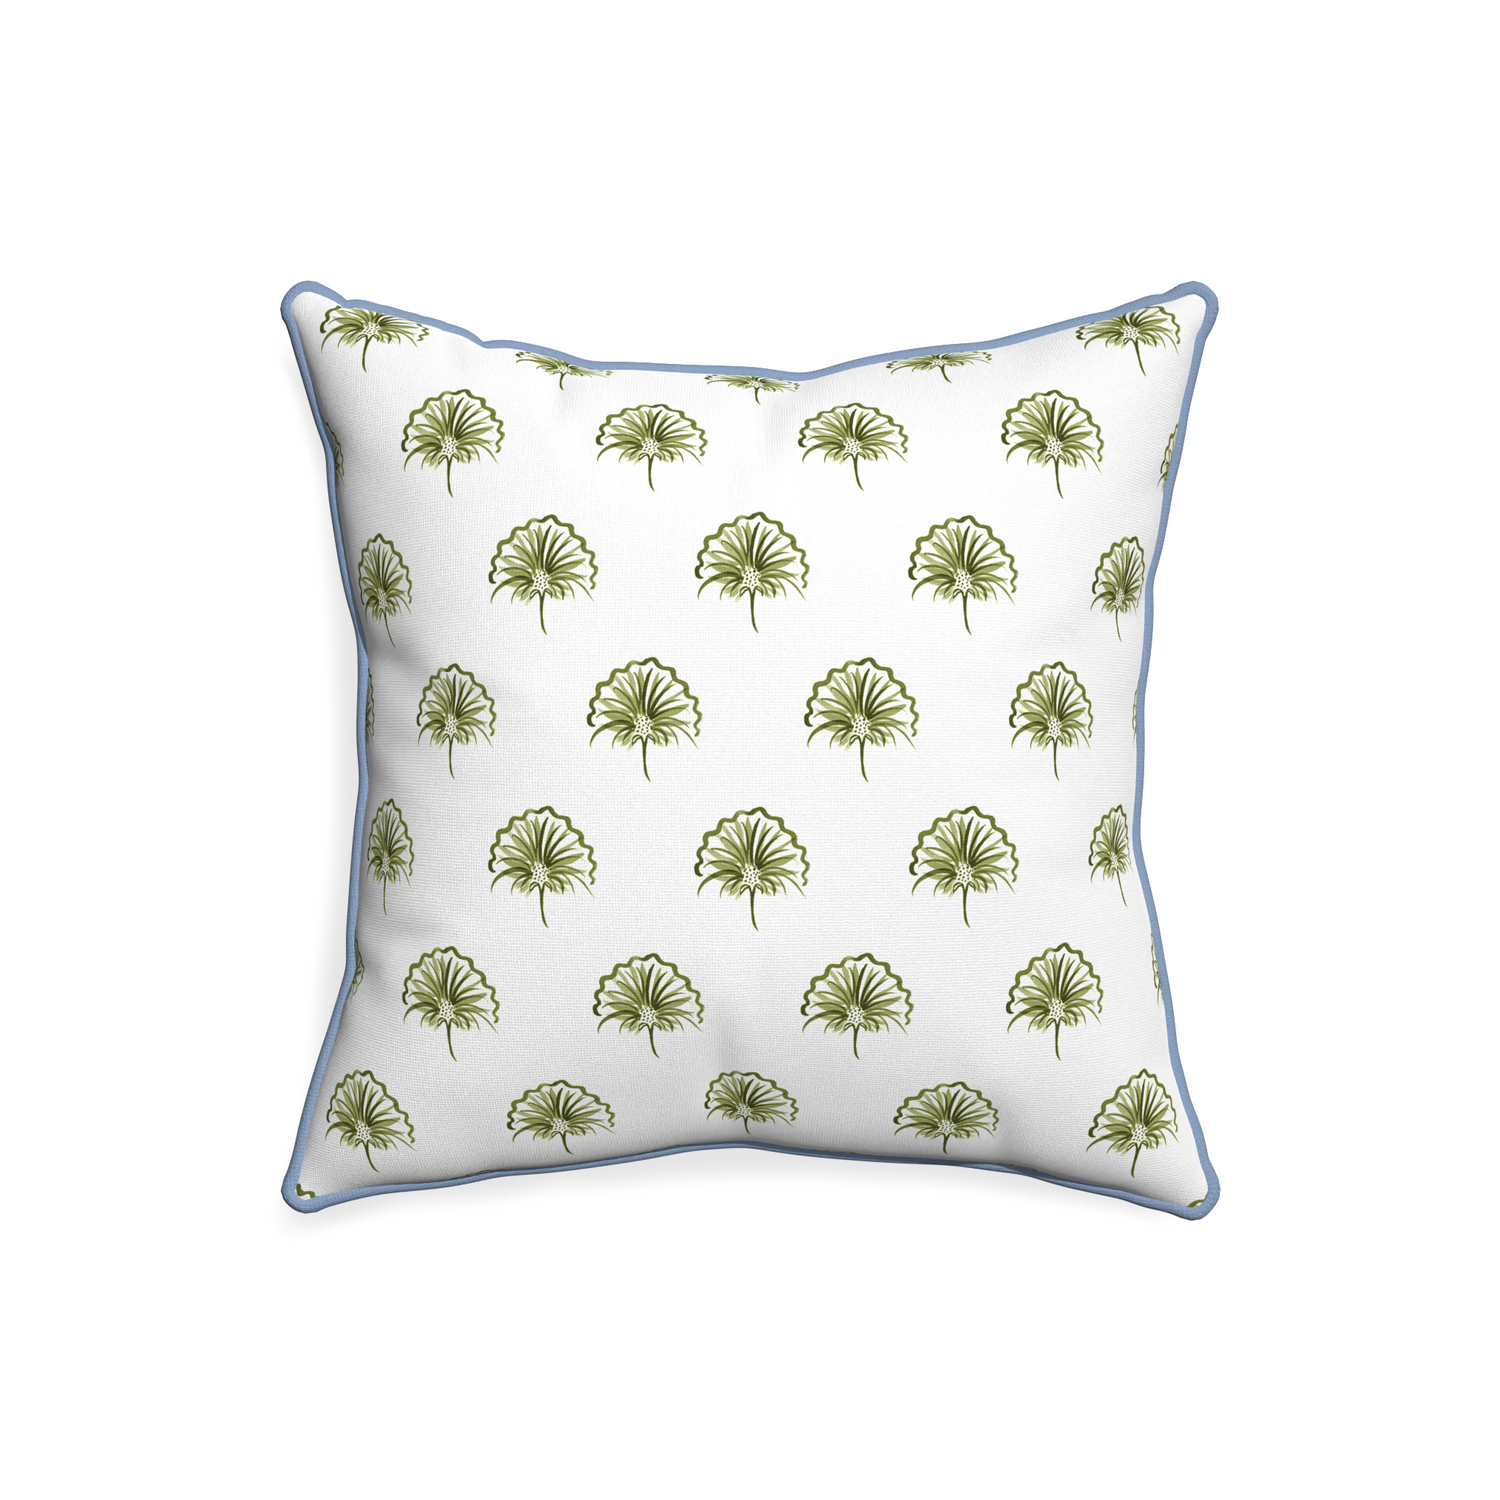 20-square penelope moss custom pillow with sky piping on white background